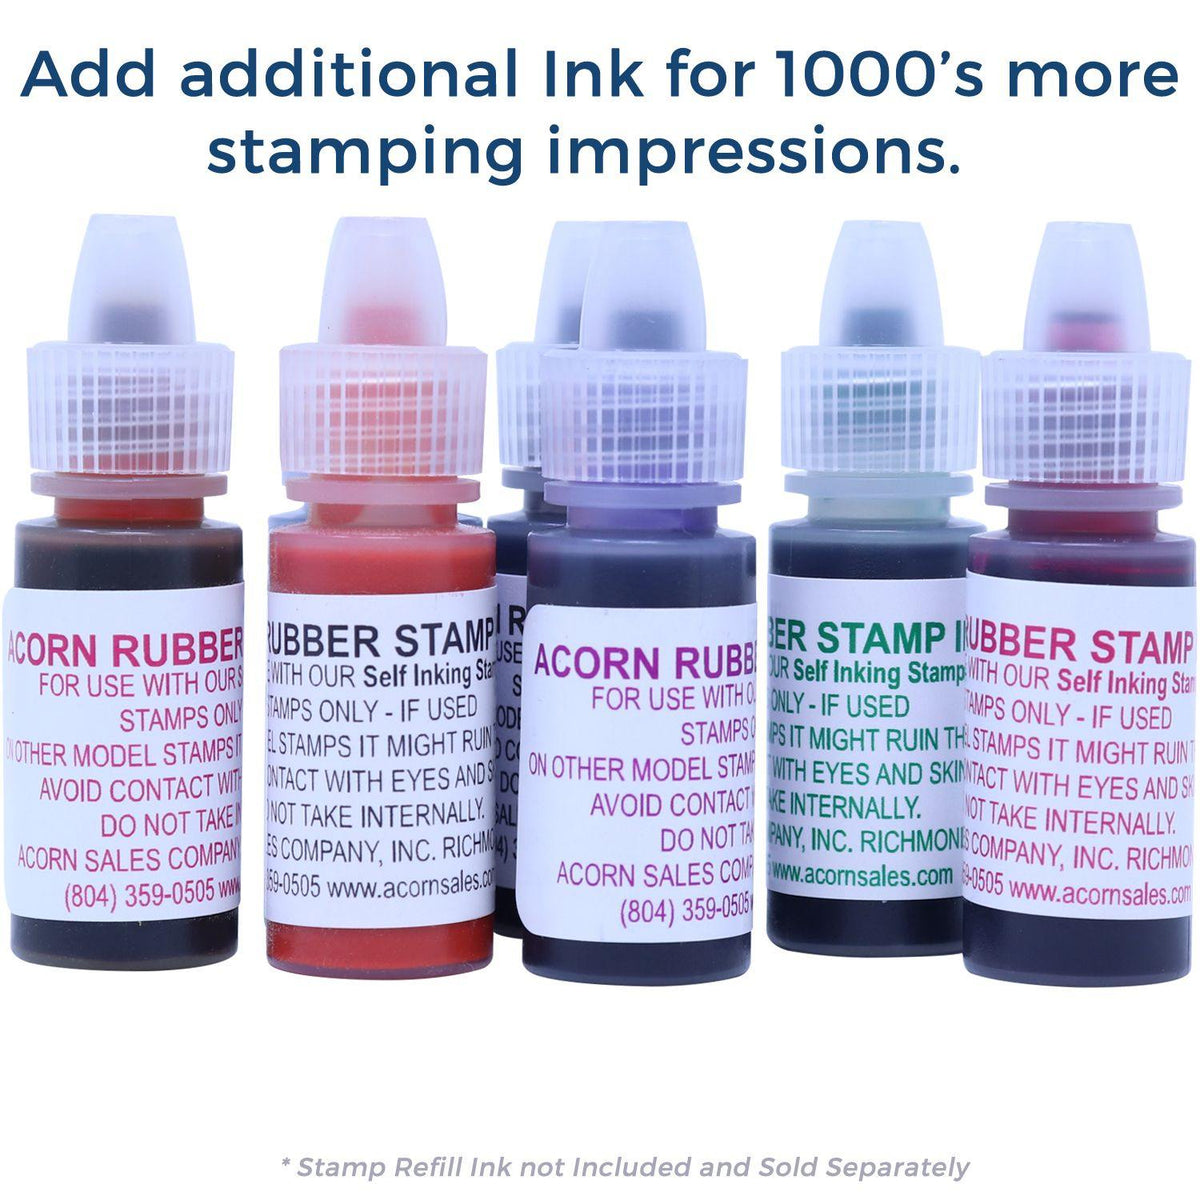 Slim Pre-Inked Additional Postage Required Stamp - Engineer Seal Stamps - Brand_Slim, Impression Size_Small, Stamp Type_Pre-Inked Stamp, Type of Use_Postal &amp; Mailing